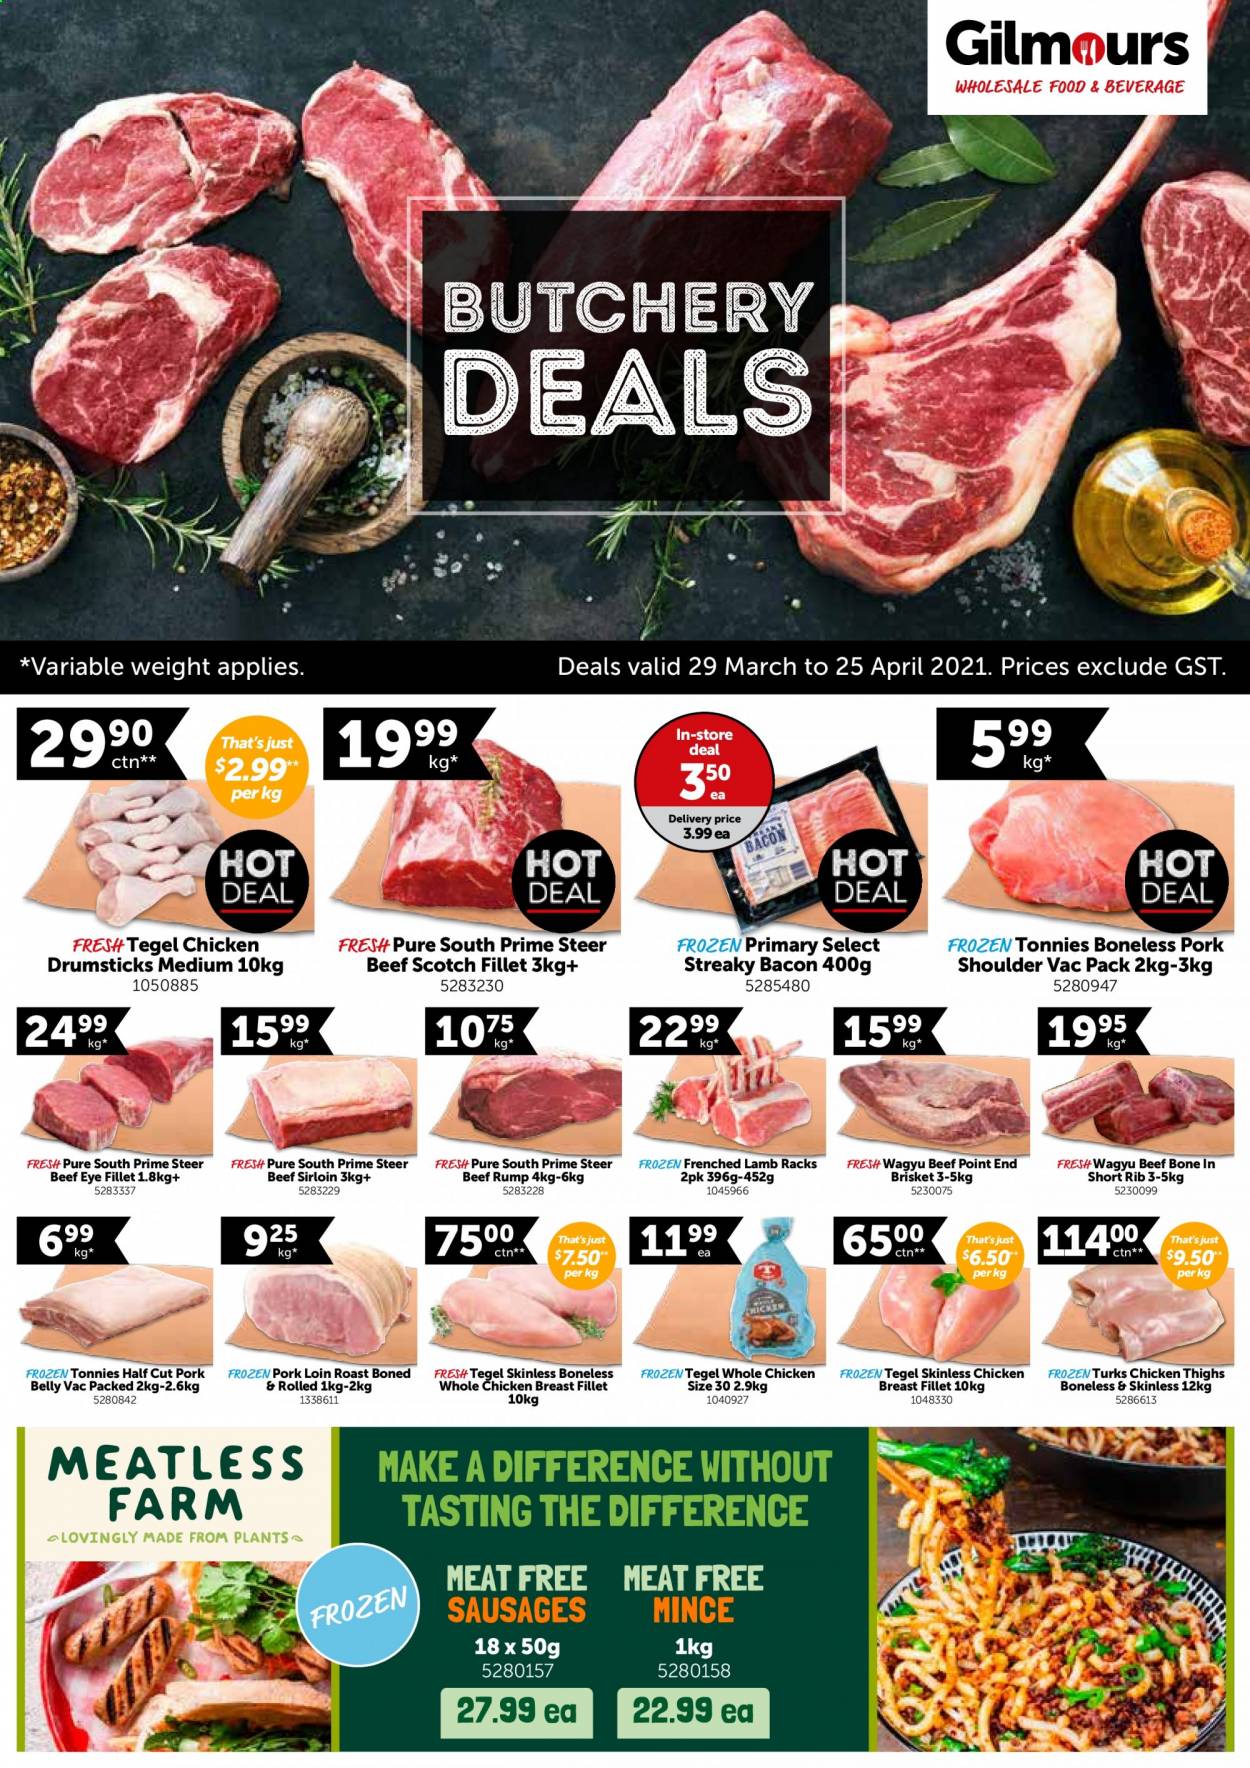 thumbnail - Gilmours mailer - 29.03.2021 - 25.04.2021 - Sales products - bacon, streaky bacon, sausage, whole chicken, chicken thighs, chicken breasts, chicken drumsticks, beef meat, beef sirloin, pork belly, pork loin, pork meat, pork shoulder. Page 1.